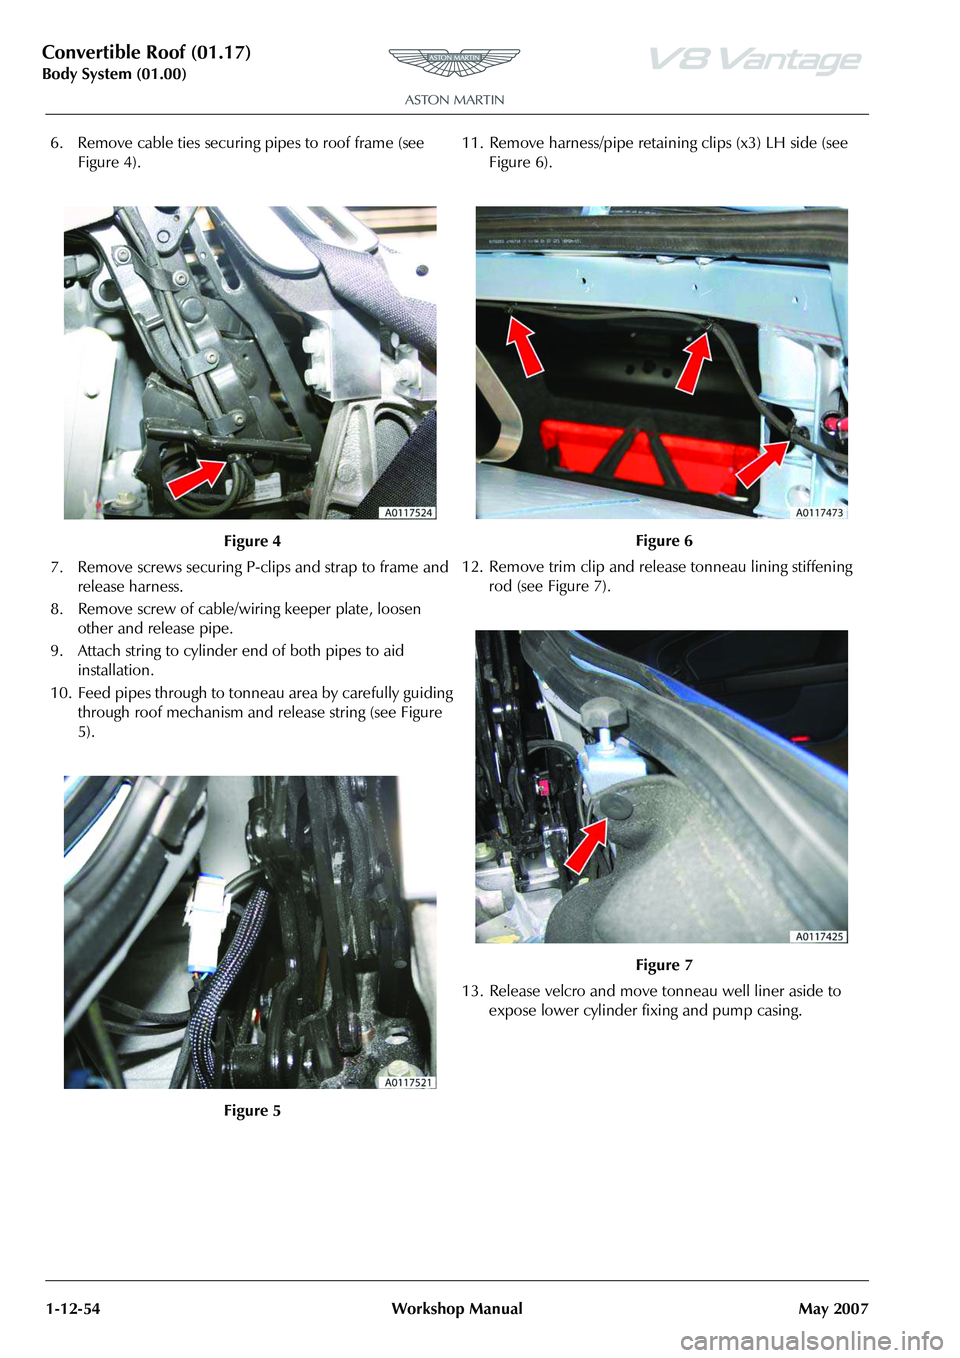 ASTON MARTIN V8 VANTAGE 2010  Workshop Manual Convertible Roof (01.17)
Body System (01.00)1-12-54 Workshop Manual May 2007
6. Remove cable ties securing pipes to roof frame (see  Figure 4).
7. Remove screws securing P-clips and strap to frame and